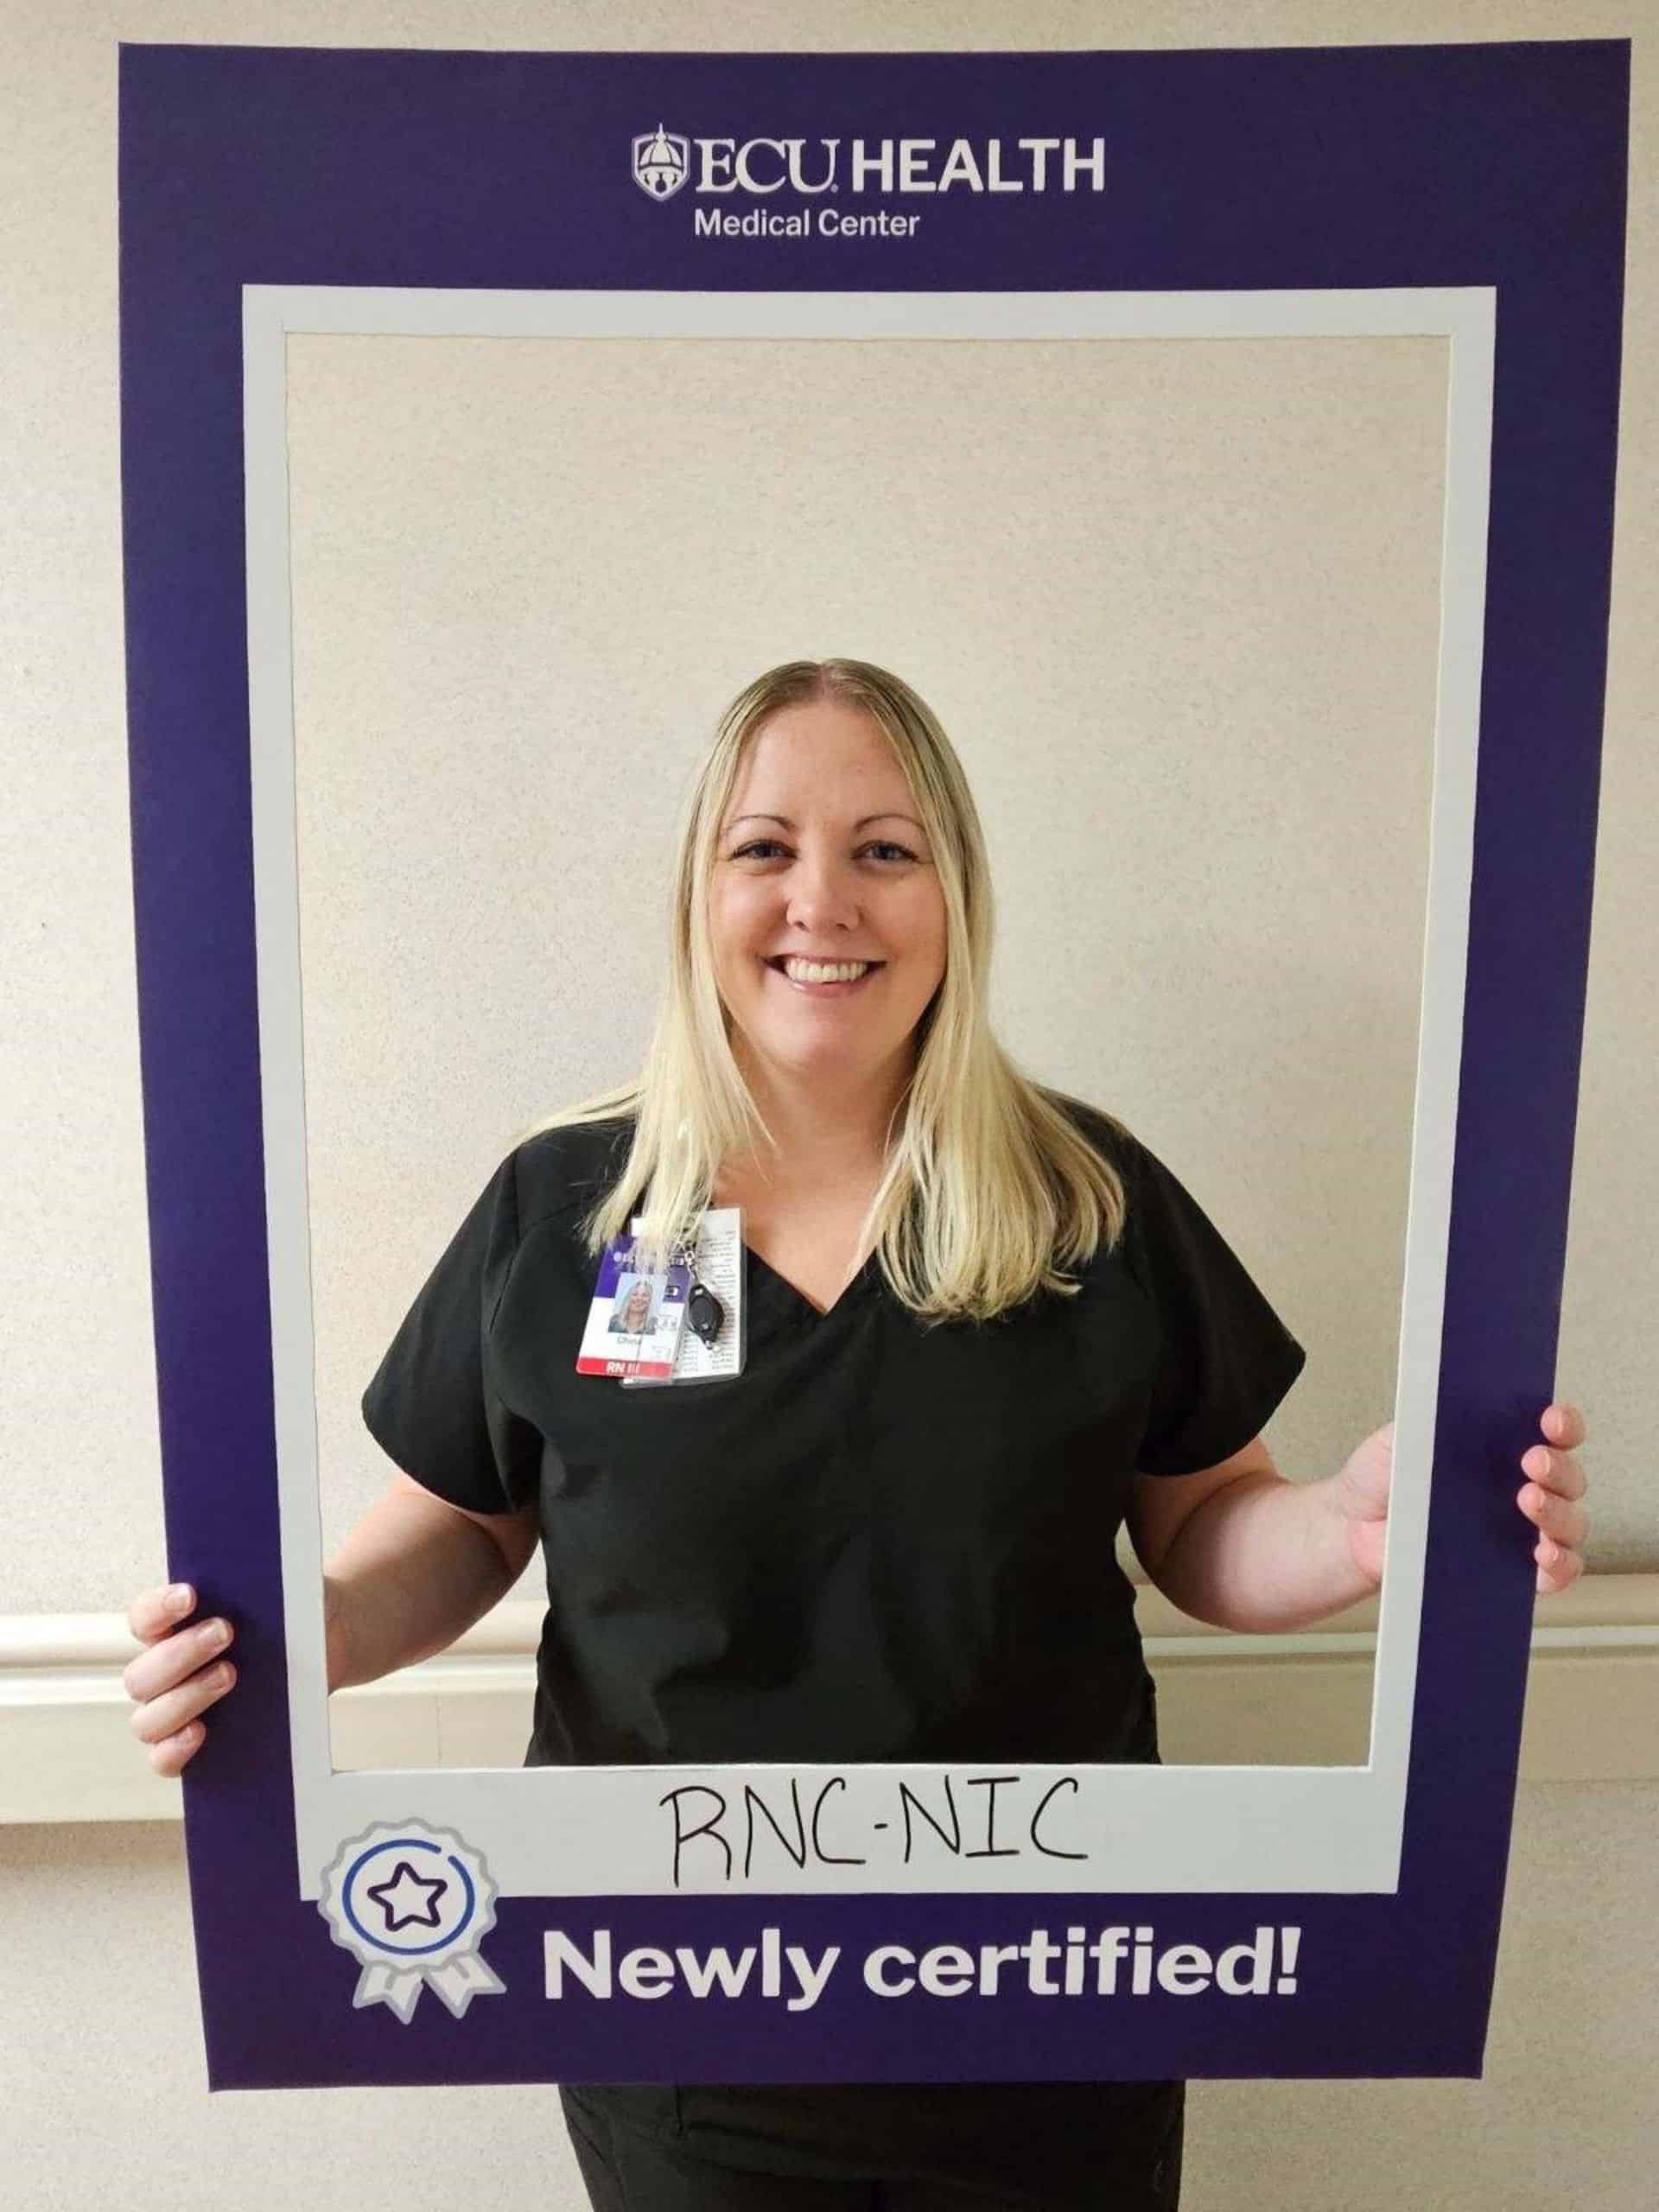 China Nuckolls, BSN, RN, RNC-NIC, works on NICU and she received her Neonatal Intensive Care Nursing specialty certification.